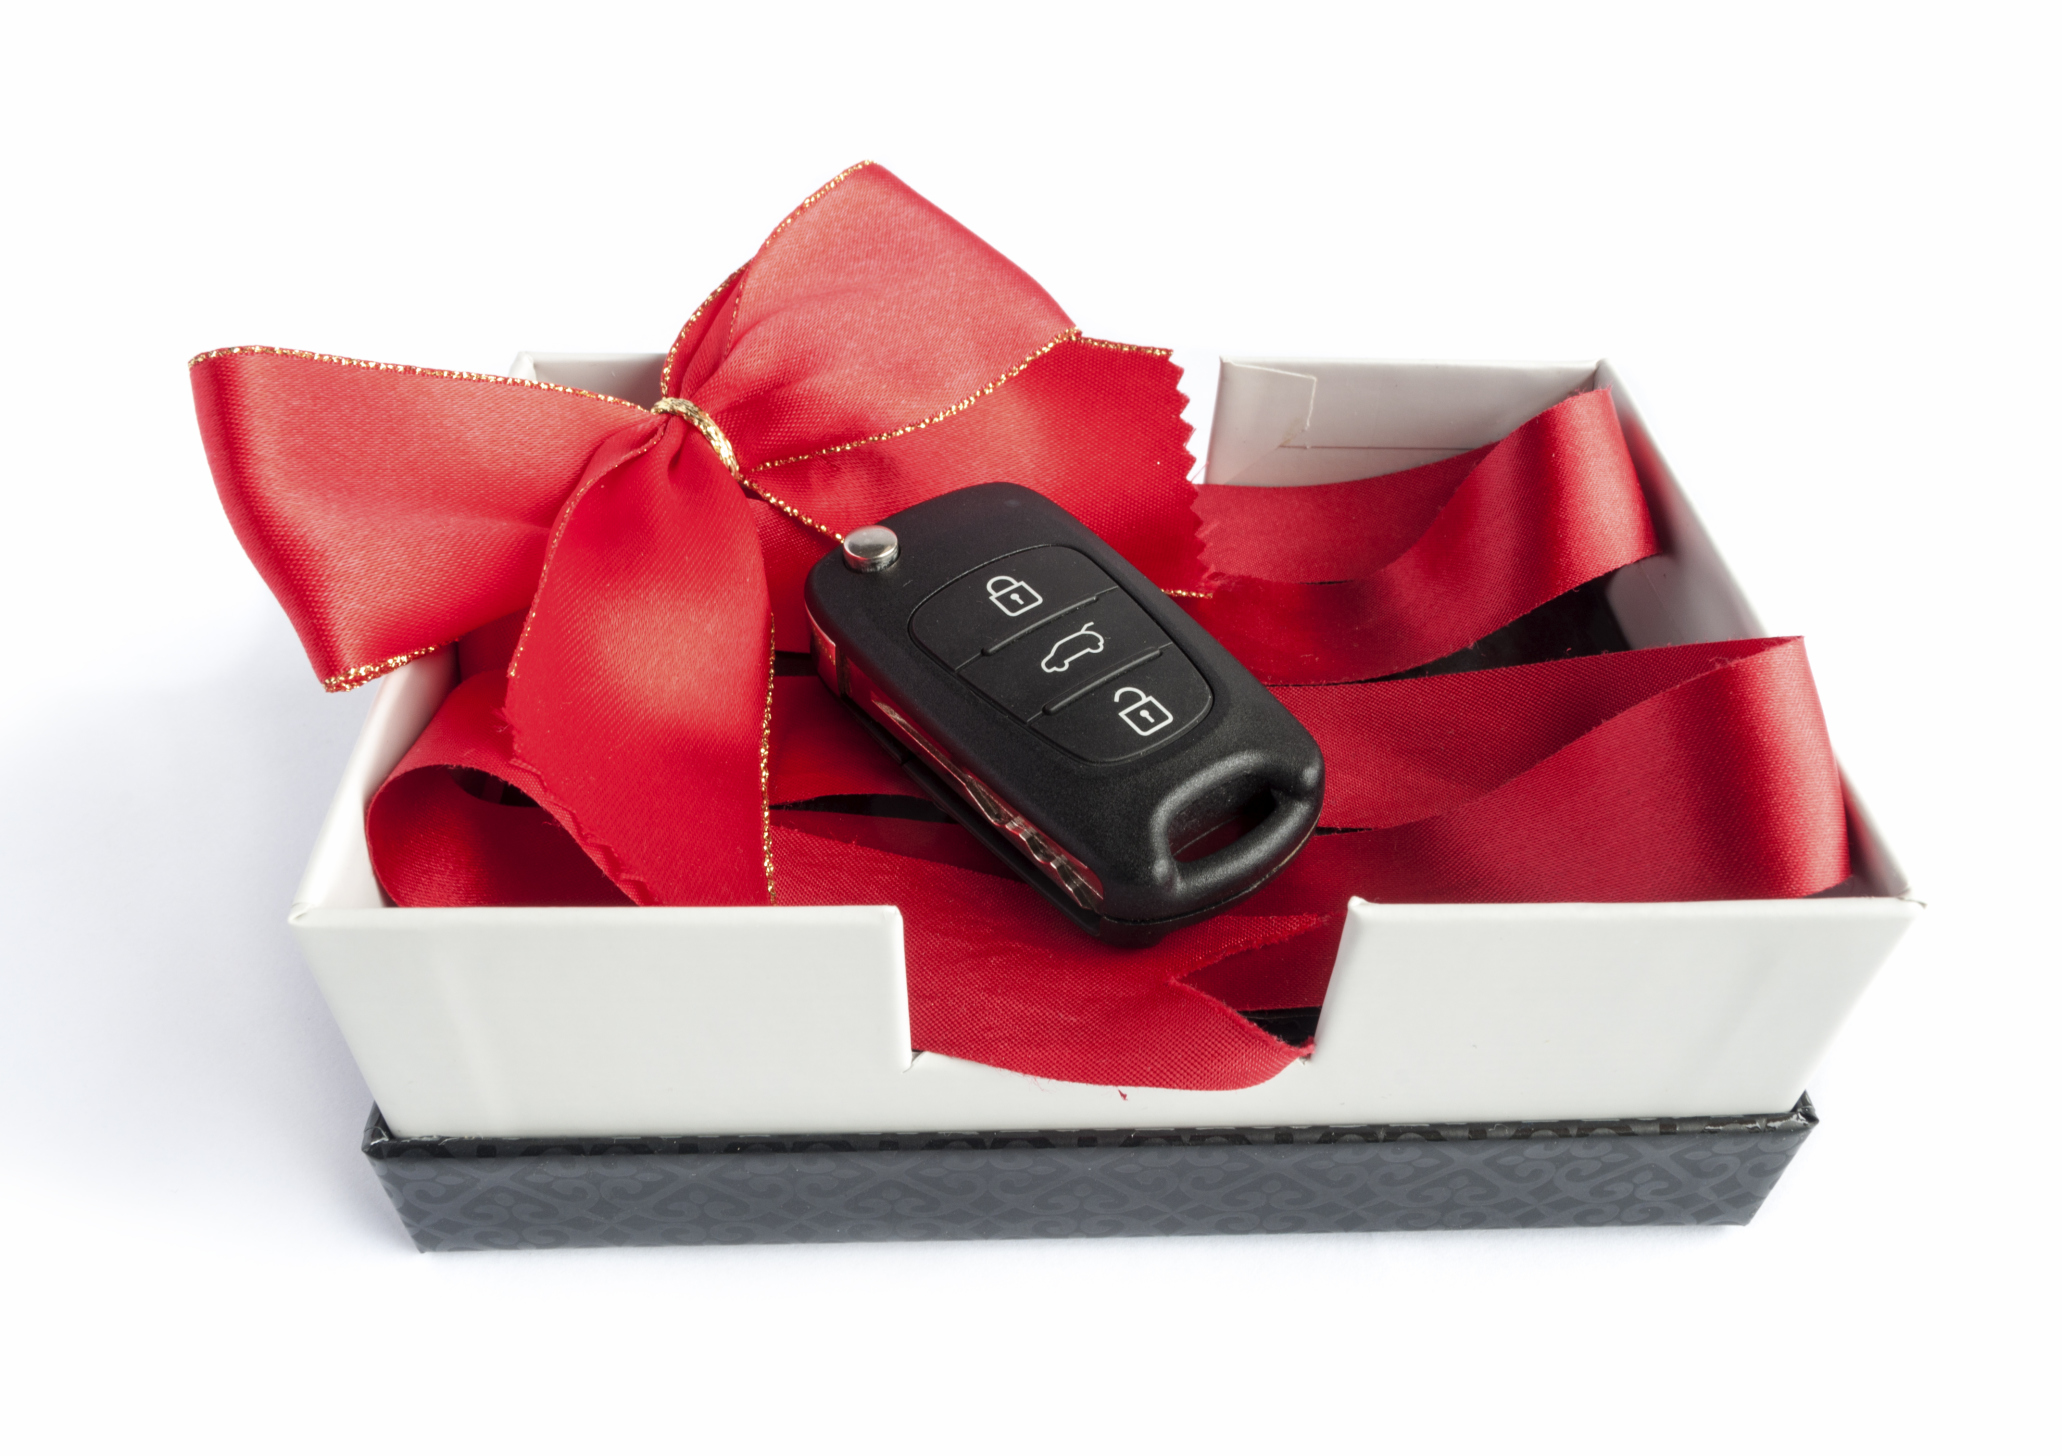 The Most Creative Gifts for Car Lovers